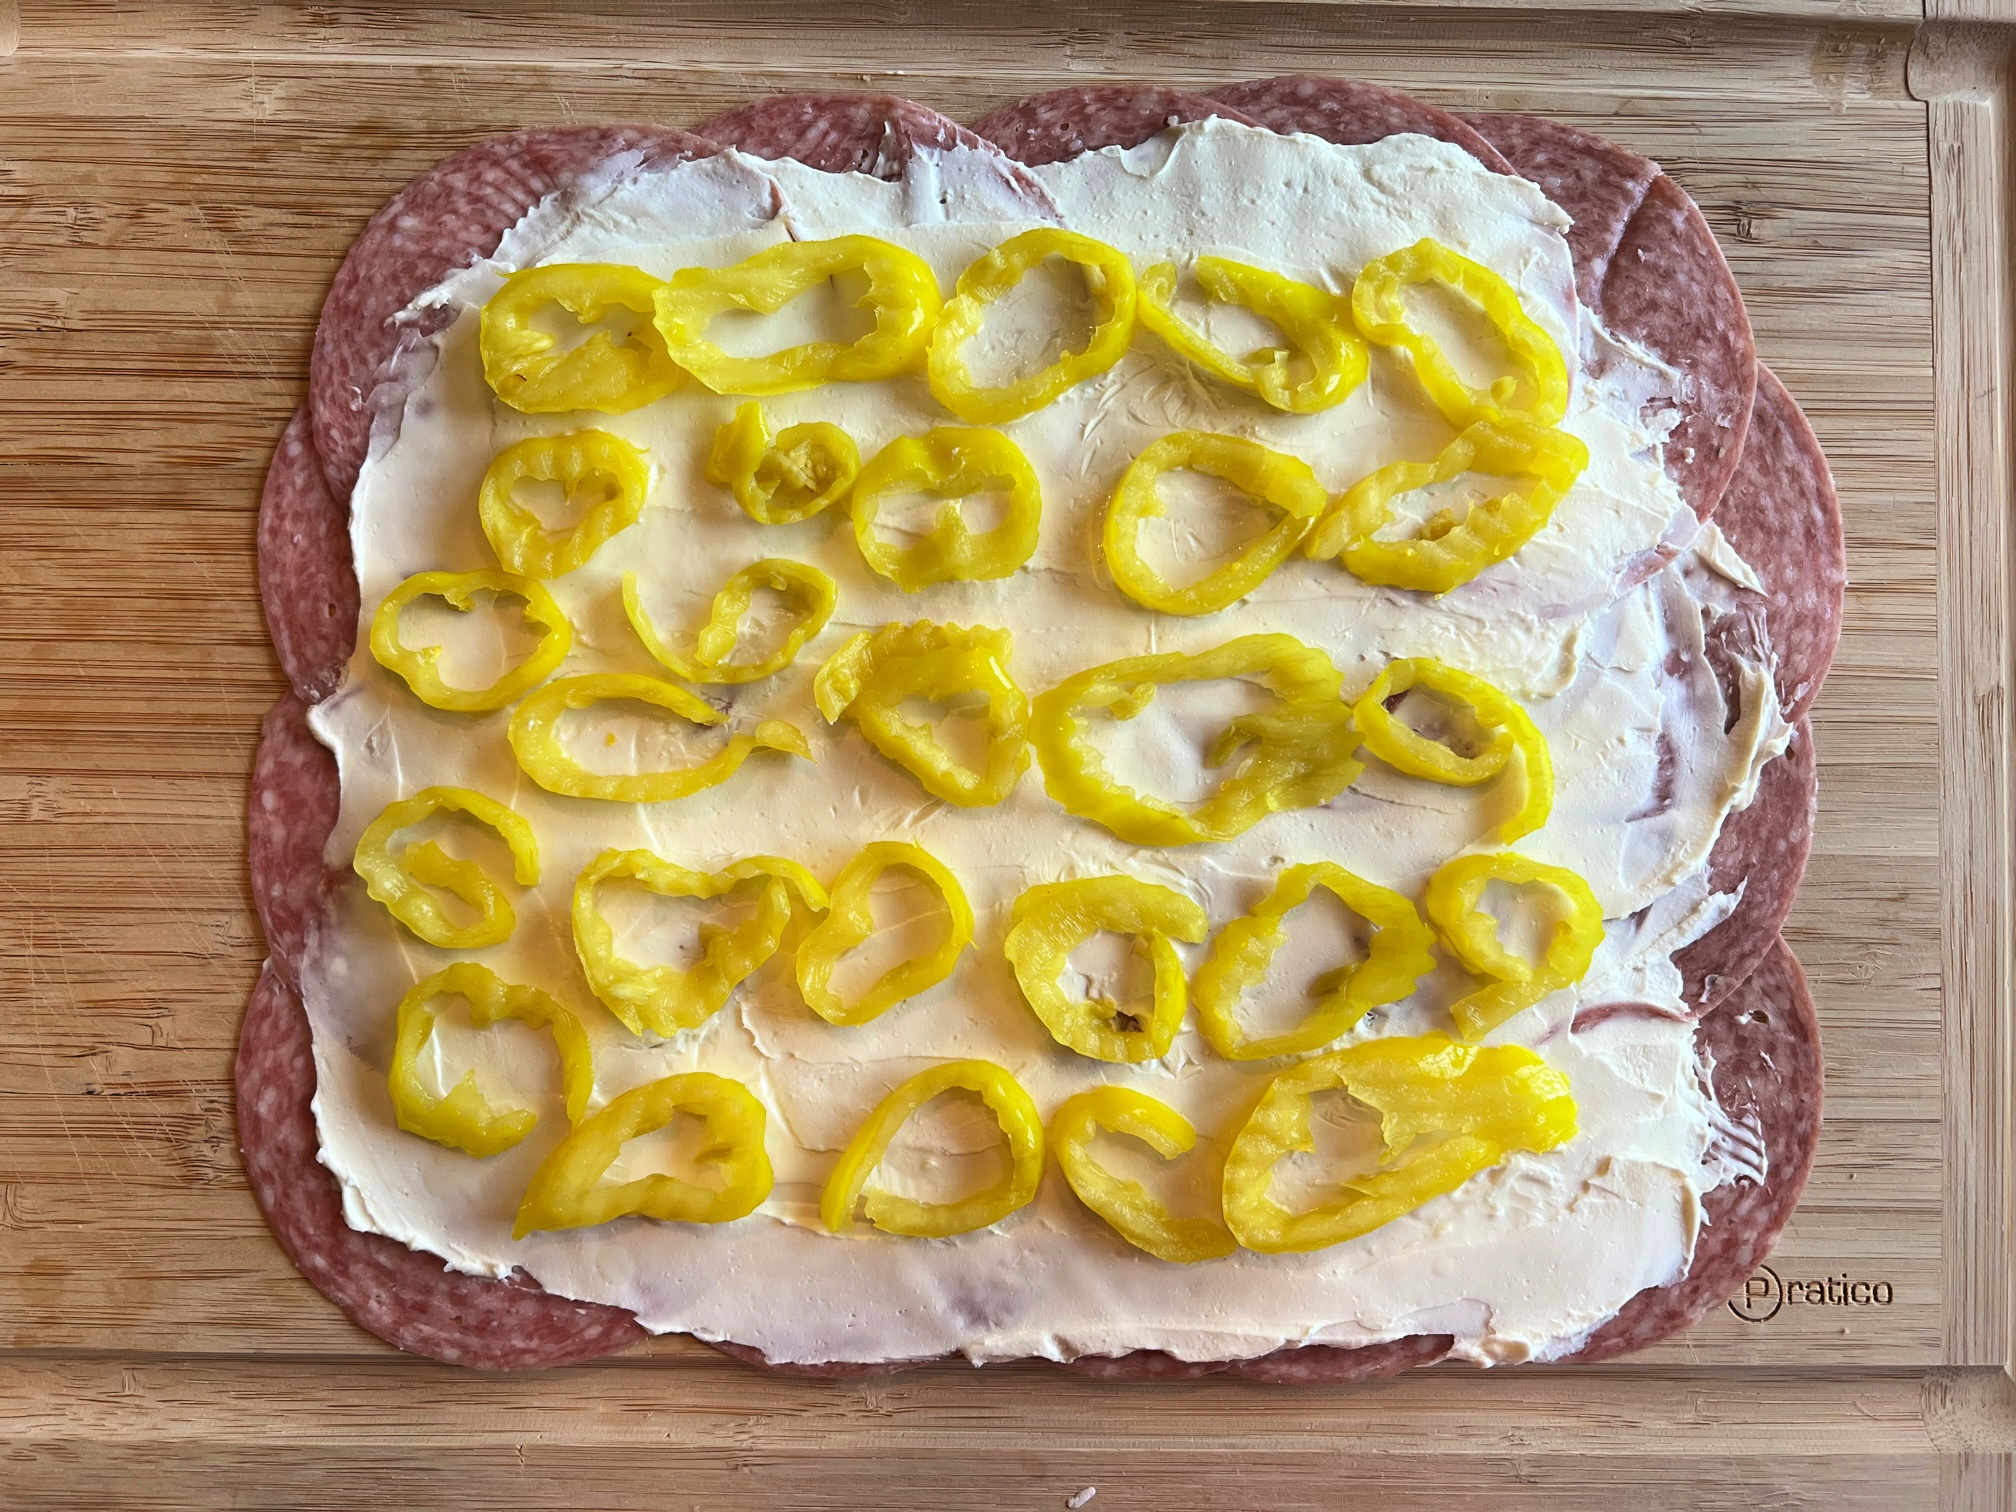 This photo shows the banana peppers placed evenly on top of the cream cheese and salami. 